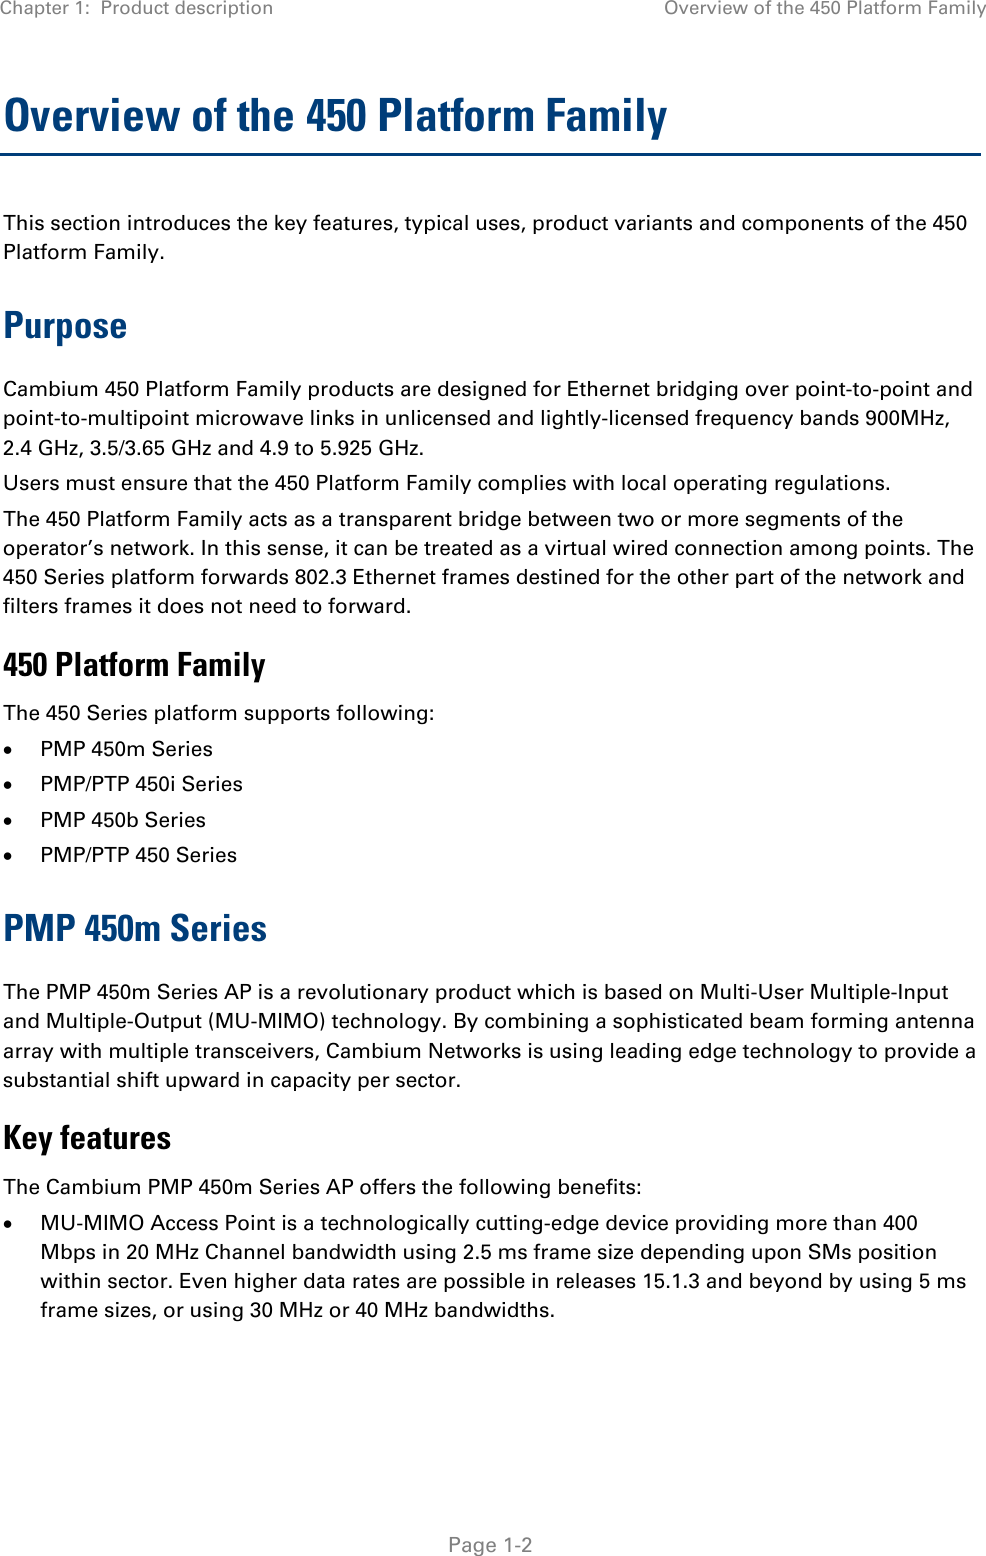 Chapter 1:  Product description Overview of the 450 Platform Family   Page 1-2 Overview of the 450 Platform Family  This section introduces the key features, typical uses, product variants and components of the 450 Platform Family. Purpose Cambium 450 Platform Family products are designed for Ethernet bridging over point-to-point and point-to-multipoint microwave links in unlicensed and lightly-licensed frequency bands 900MHz, 2.4 GHz, 3.5/3.65 GHz and 4.9 to 5.925 GHz. Users must ensure that the 450 Platform Family complies with local operating regulations. The 450 Platform Family acts as a transparent bridge between two or more segments of the operator’s network. In this sense, it can be treated as a virtual wired connection among points. The 450 Series platform forwards 802.3 Ethernet frames destined for the other part of the network and filters frames it does not need to forward.  450 Platform Family The 450 Series platform supports following: • PMP 450m Series • PMP/PTP 450i Series • PMP 450b Series  • PMP/PTP 450 Series PMP 450m Series The PMP 450m Series AP is a revolutionary product which is based on Multi-User Multiple-Input and Multiple-Output (MU-MIMO) technology. By combining a sophisticated beam forming antenna array with multiple transceivers, Cambium Networks is using leading edge technology to provide a substantial shift upward in capacity per sector. Key features The Cambium PMP 450m Series AP offers the following benefits: • MU-MIMO Access Point is a technologically cutting-edge device providing more than 400 Mbps in 20 MHz Channel bandwidth using 2.5 ms frame size depending upon SMs position within sector. Even higher data rates are possible in releases 15.1.3 and beyond by using 5 ms frame sizes, or using 30 MHz or 40 MHz bandwidths. 